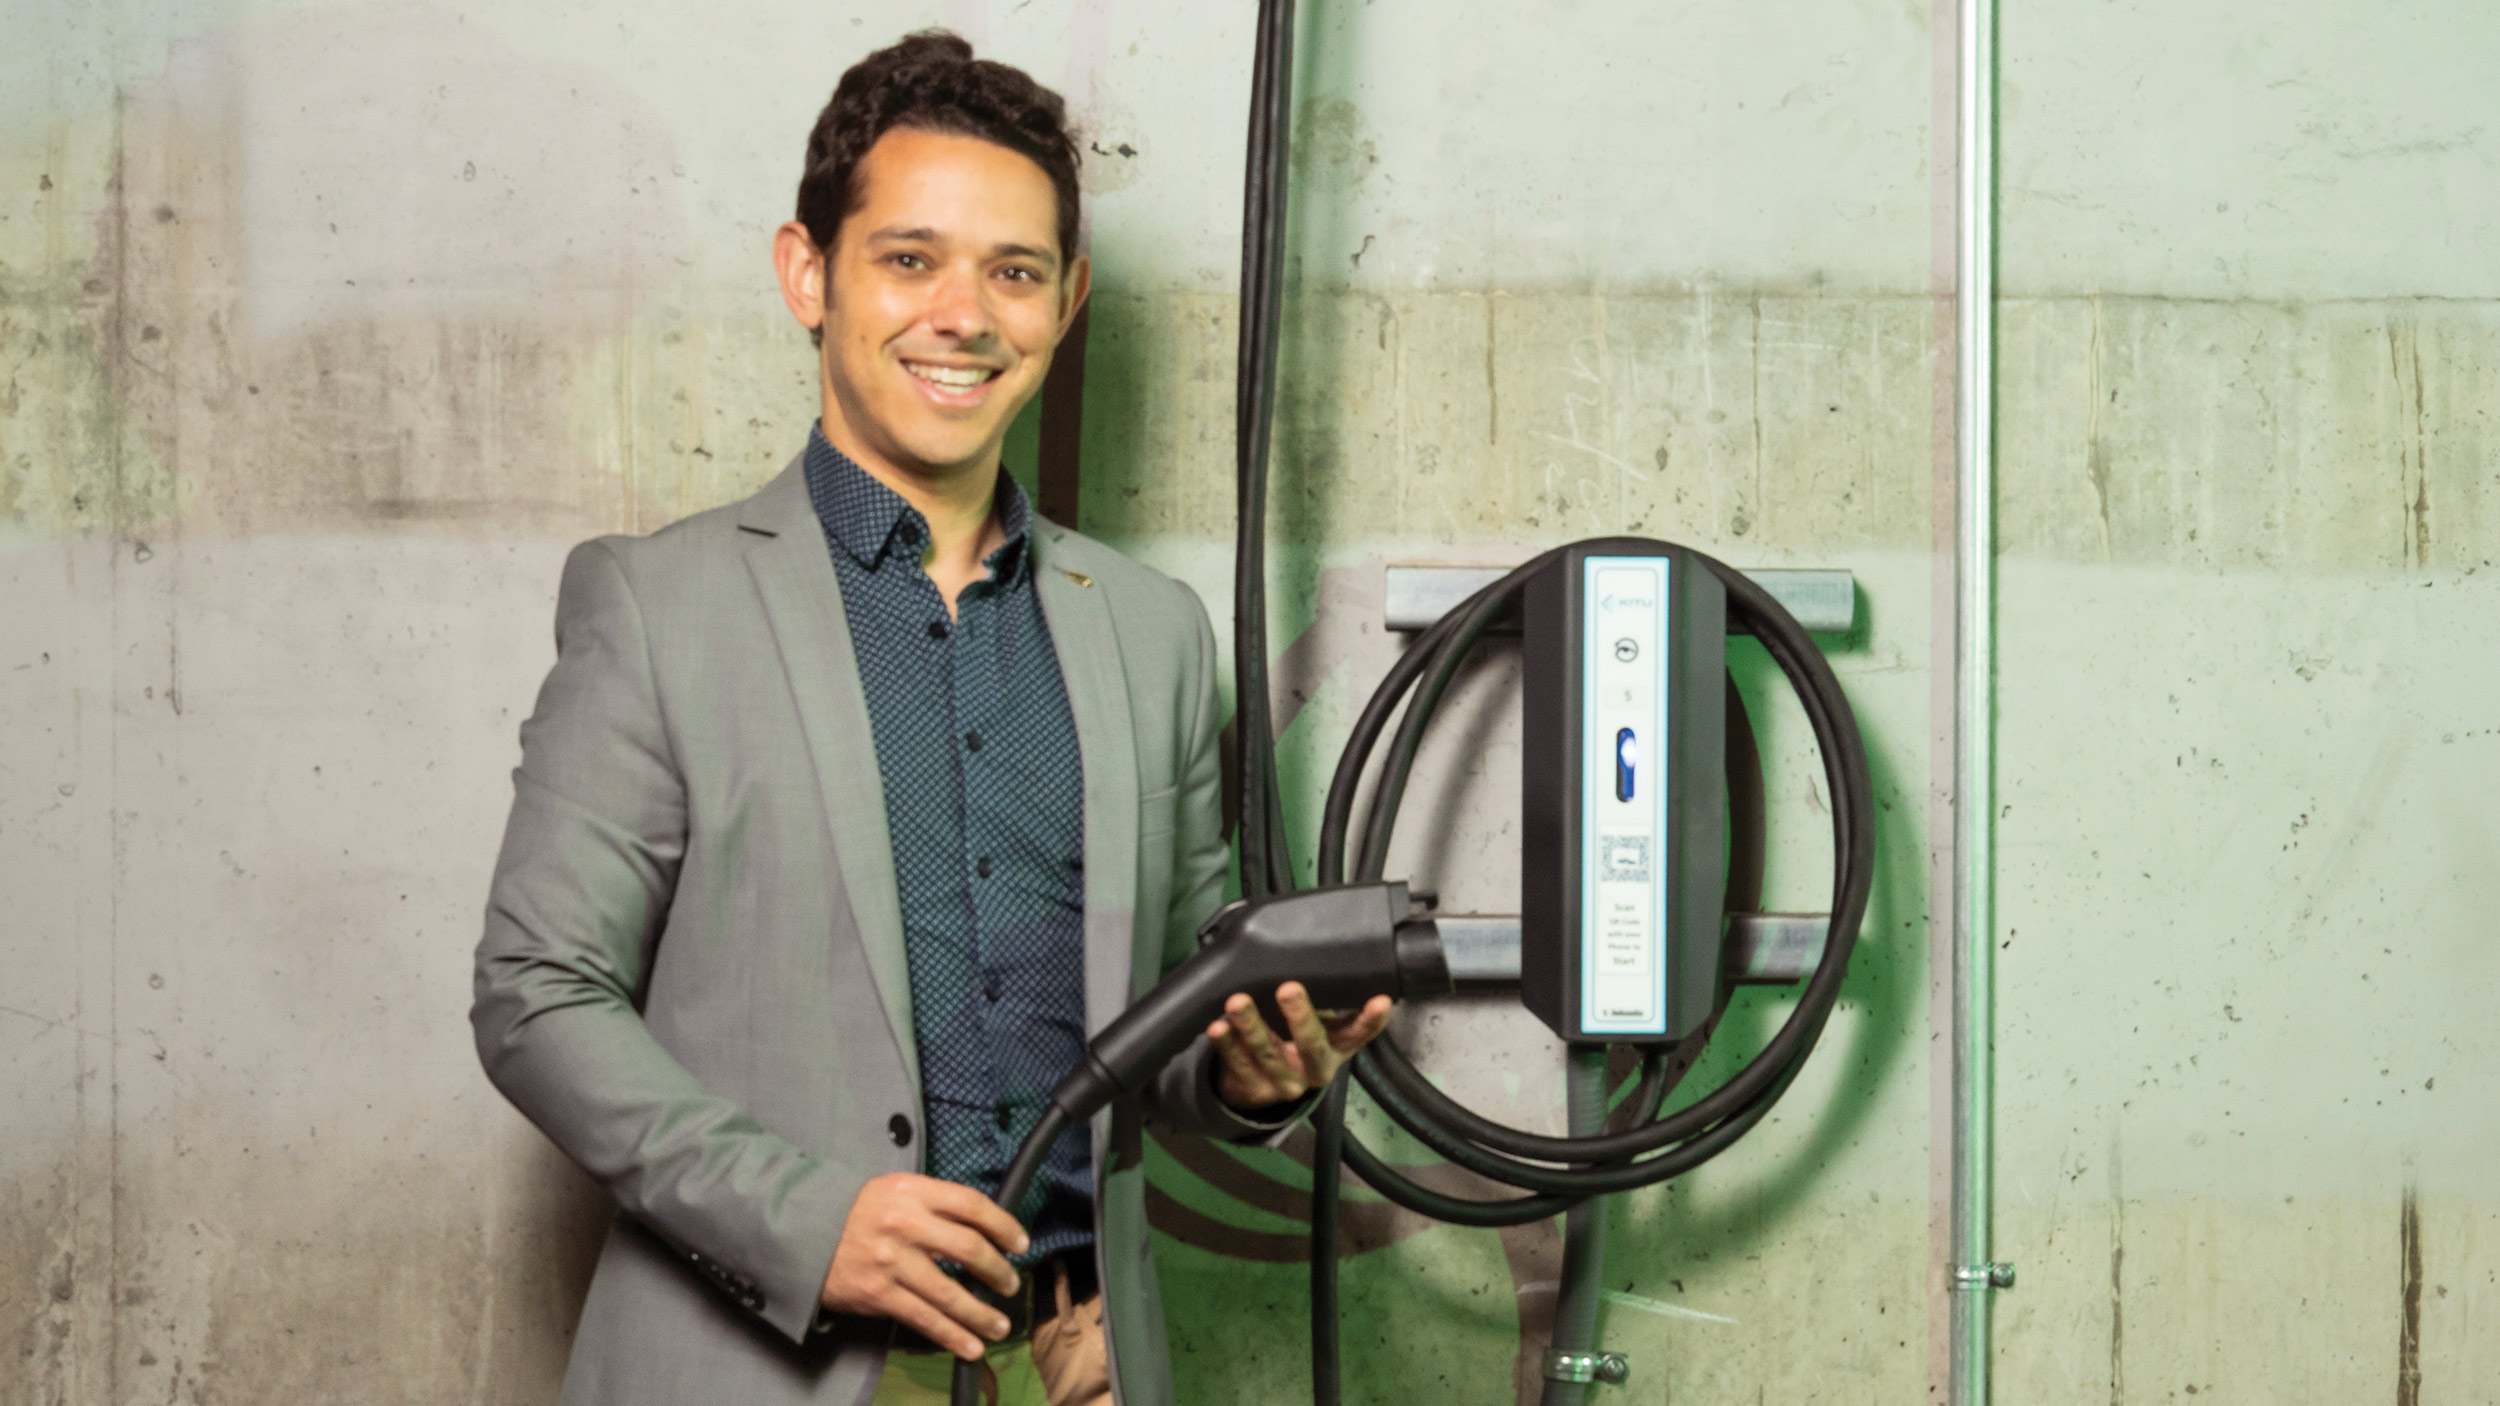 Scott Moura holding an electric car charger